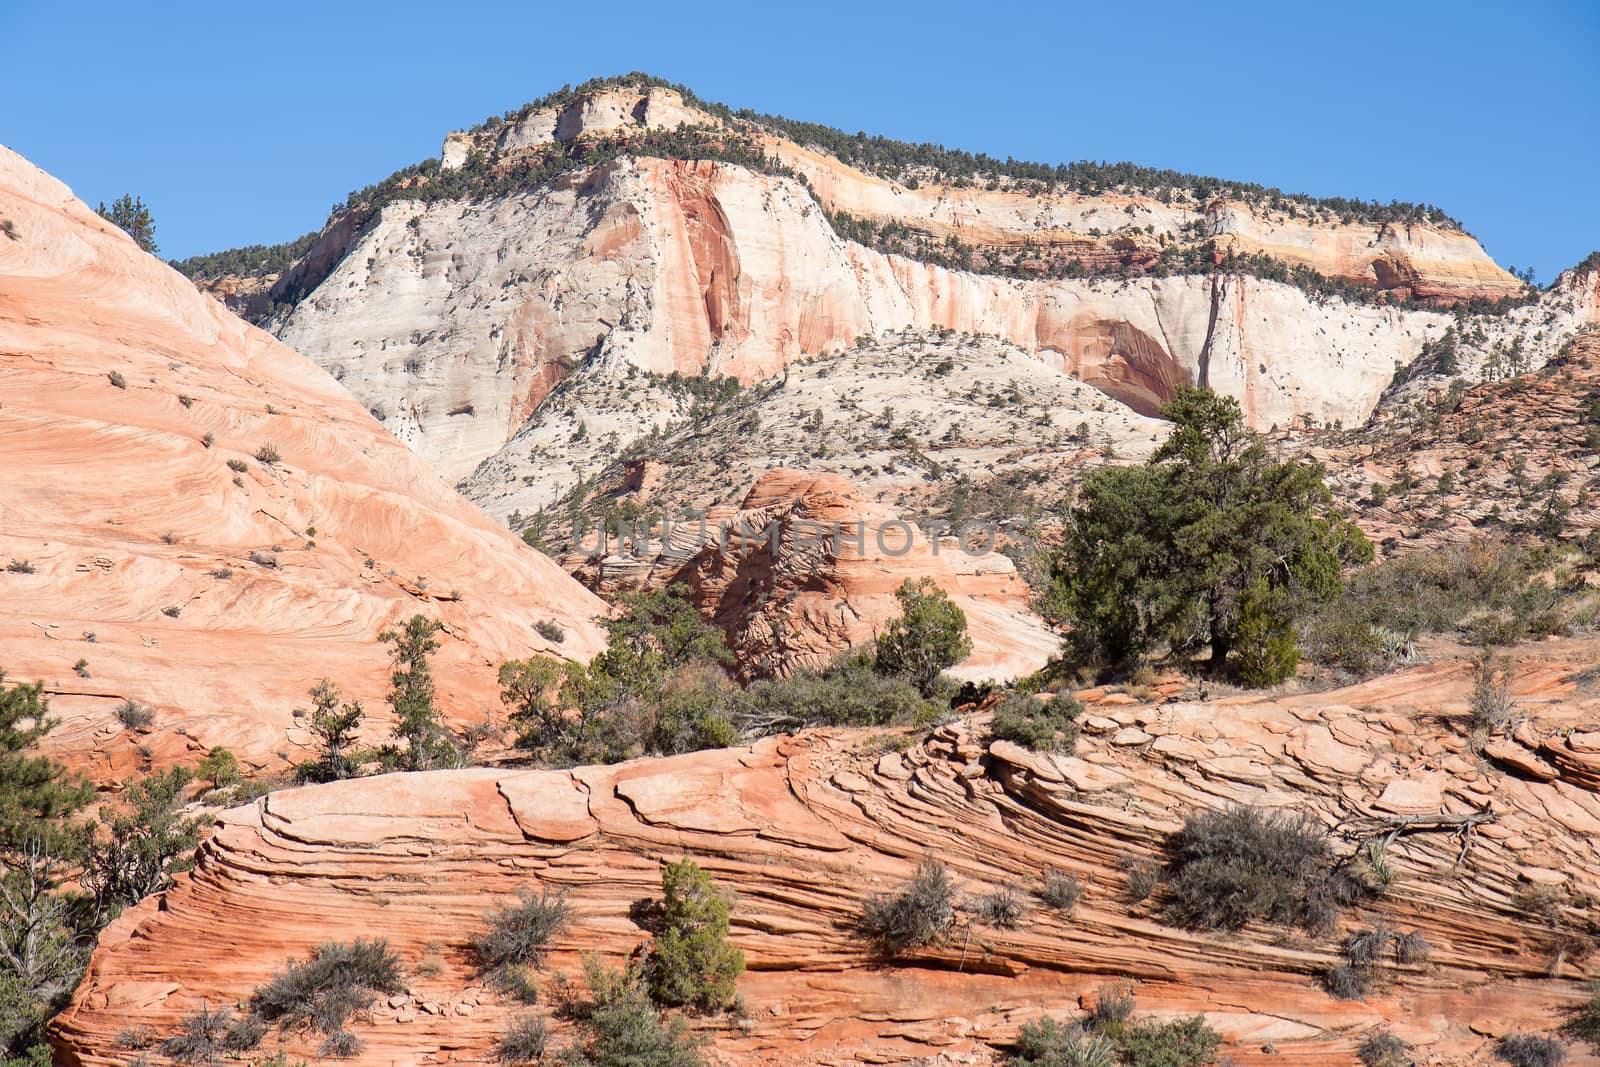 This landscape was taken in the upper plateau of Zion National Park in Utah.